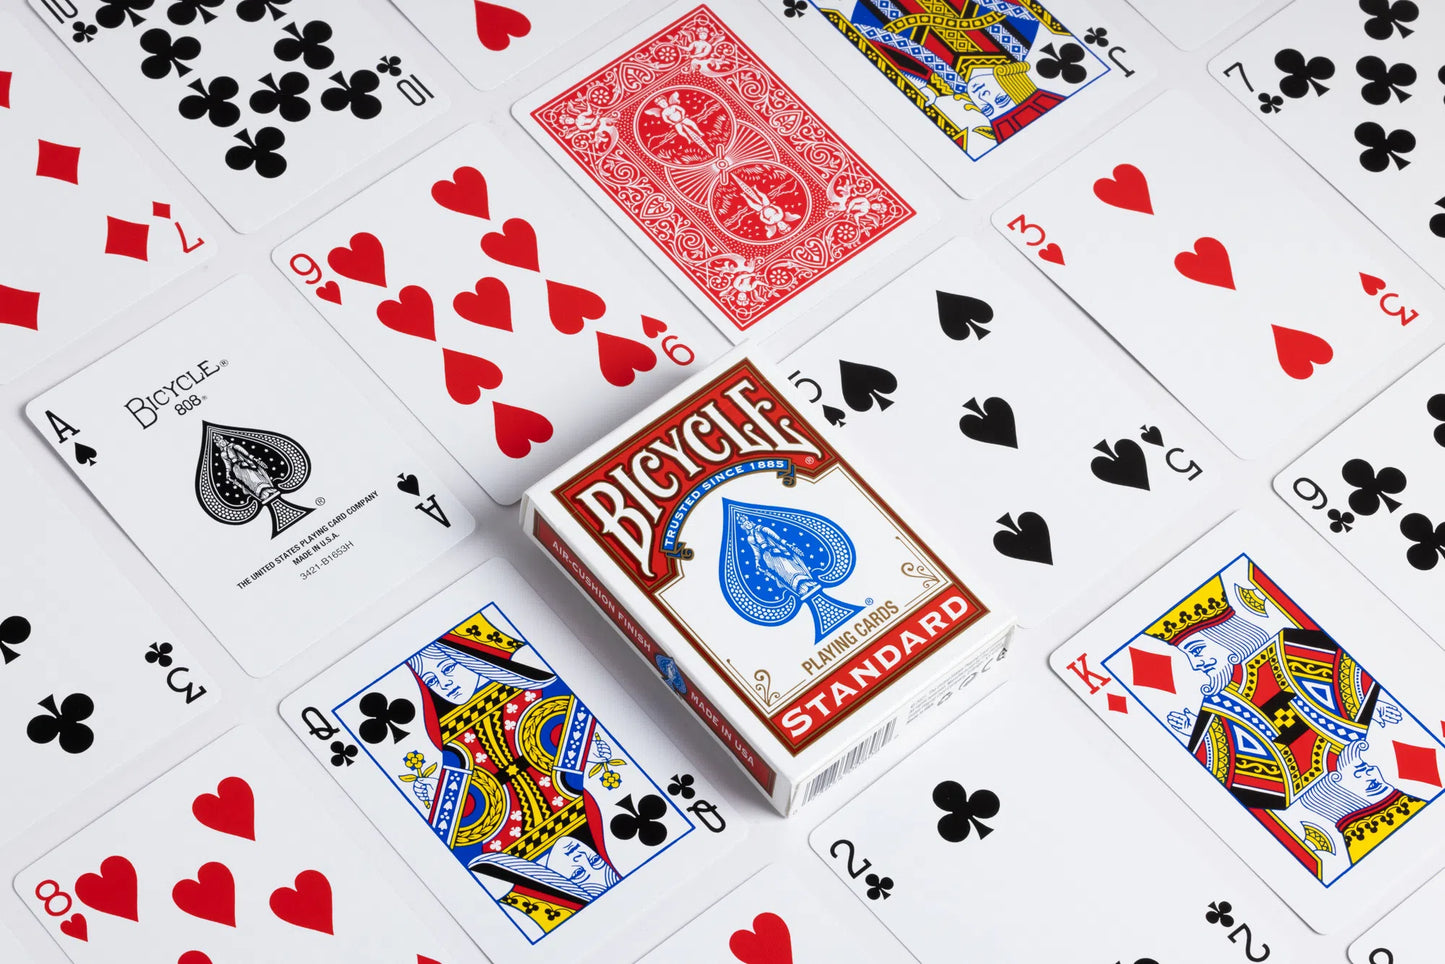 Playing Cards: Bicycle - Standard Index Red/Blue/Black Mix